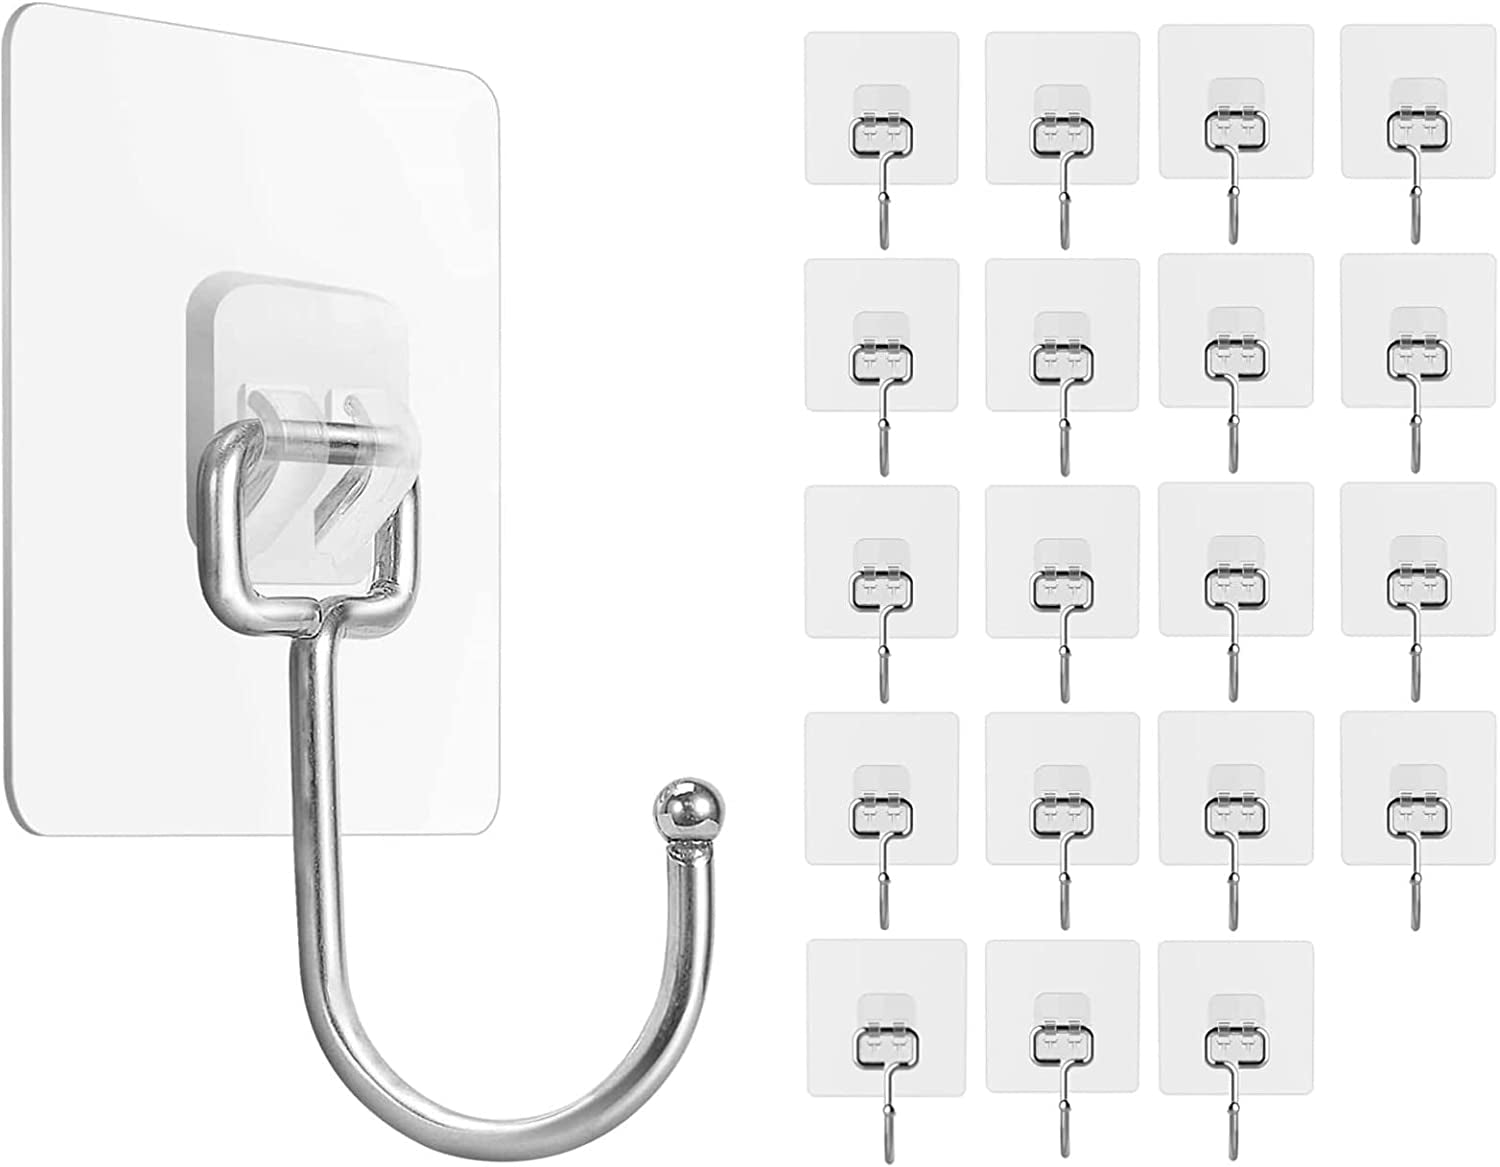 secretgreen.com.au, Large Adhesive Hooks,Wall Hooks- 20 Pcs Heavy Duty 20Kg(Max) Nail Free, Sticky Hangers with Stainless Hooks for Kitchen, Reusable Utility Towel Bath Ceiling Hooks